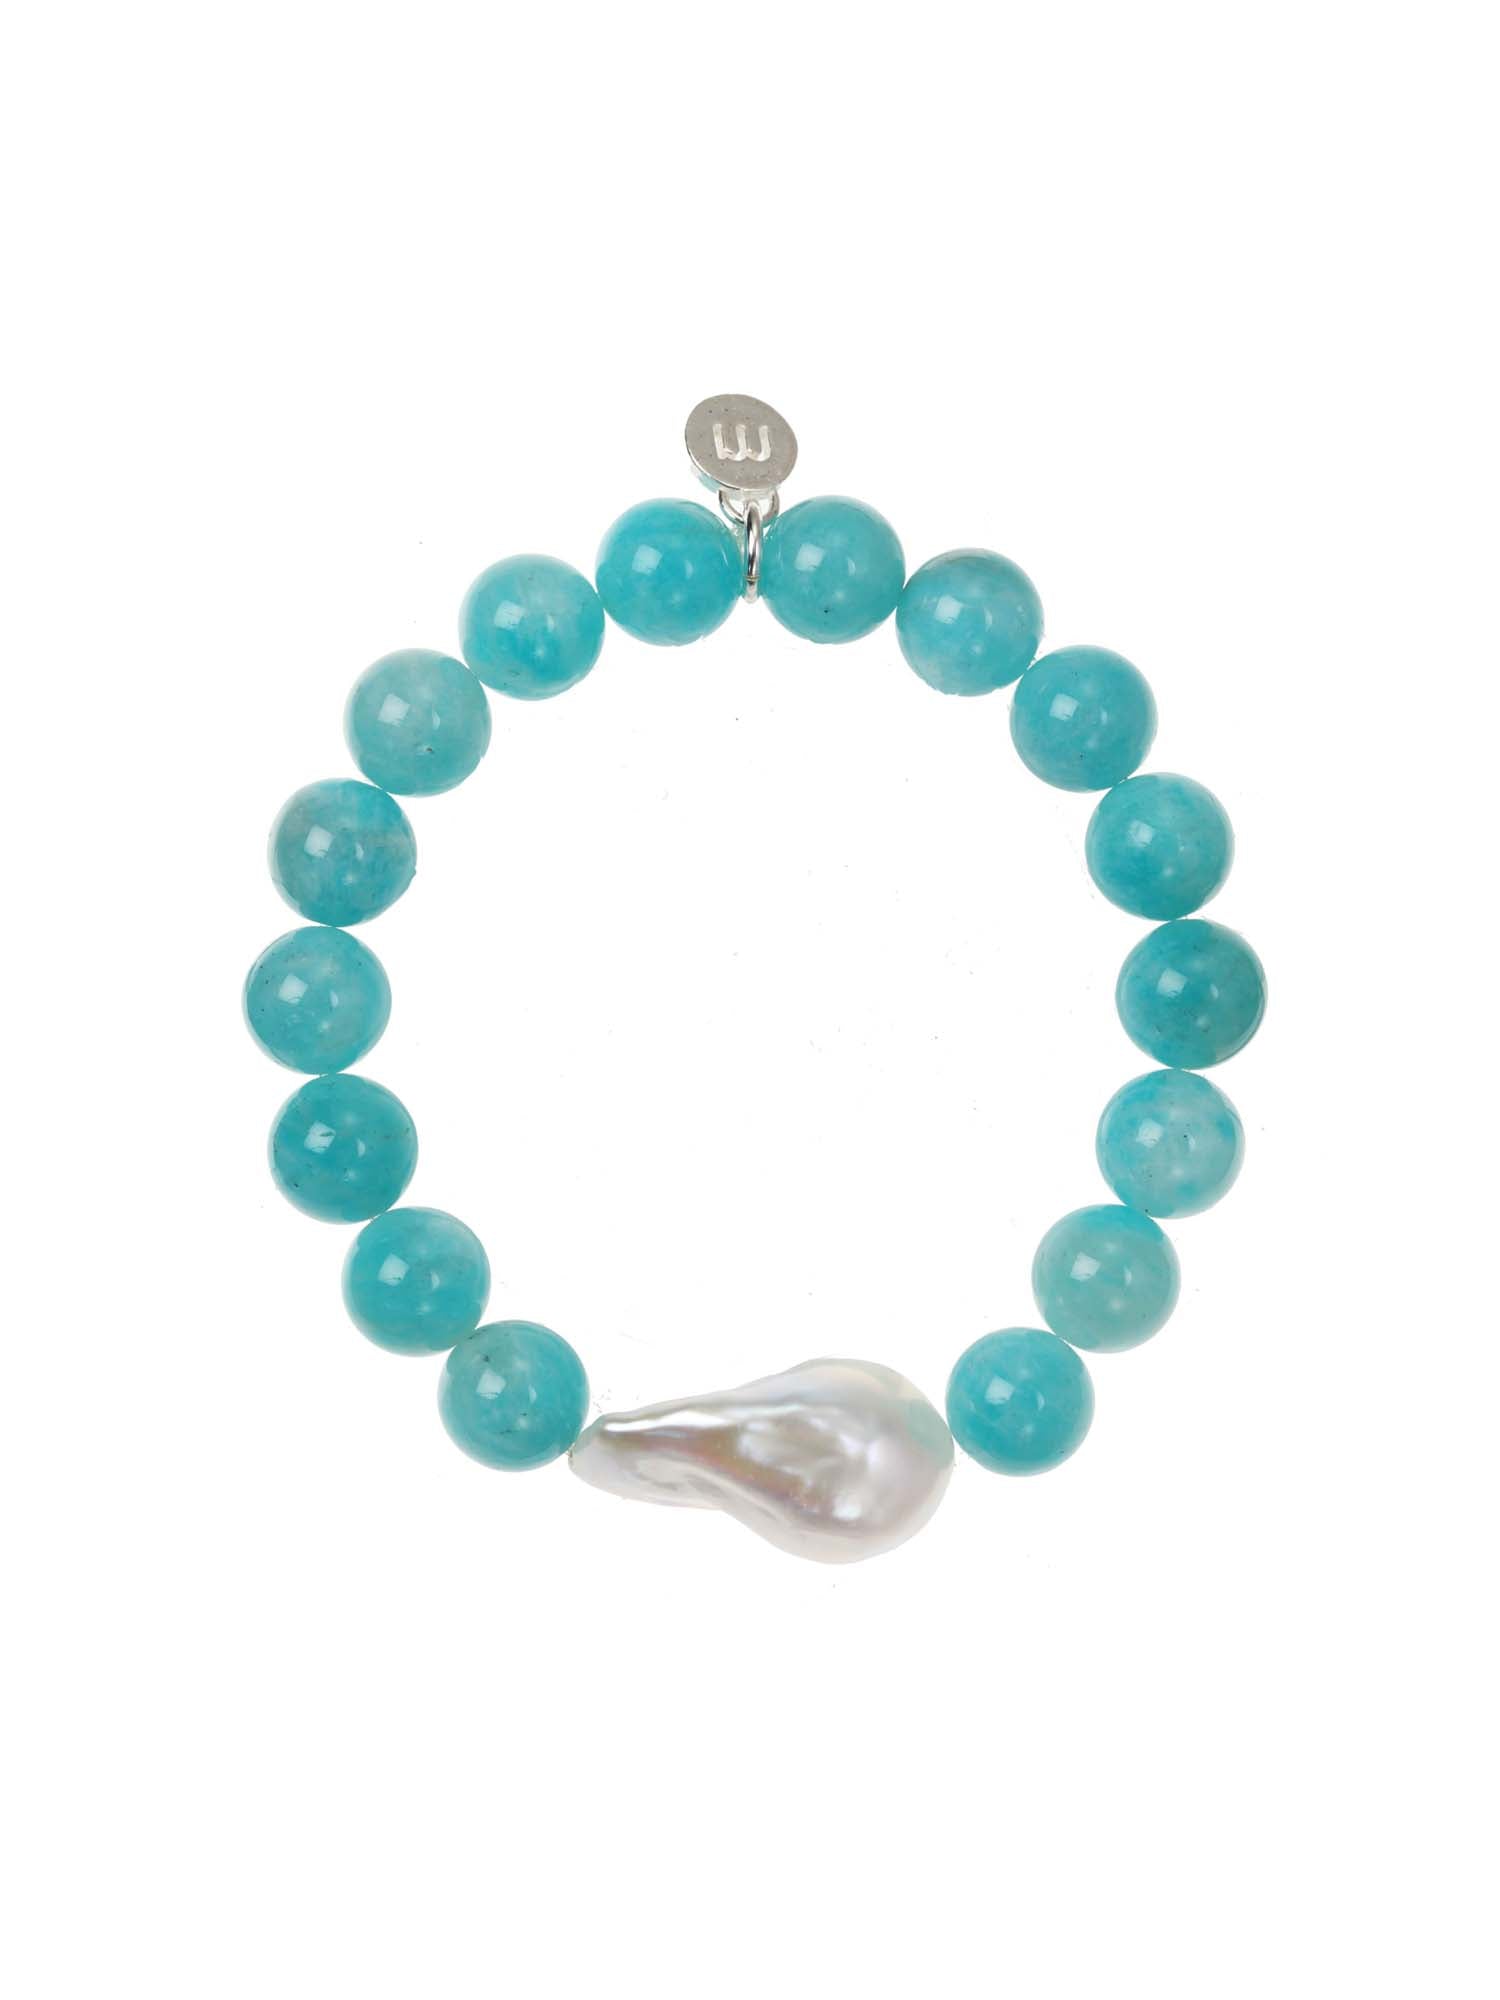 Margo Morrison Blue Green Amazonite Stretch Bracelet With Smooth Ball White Baroq Pearl